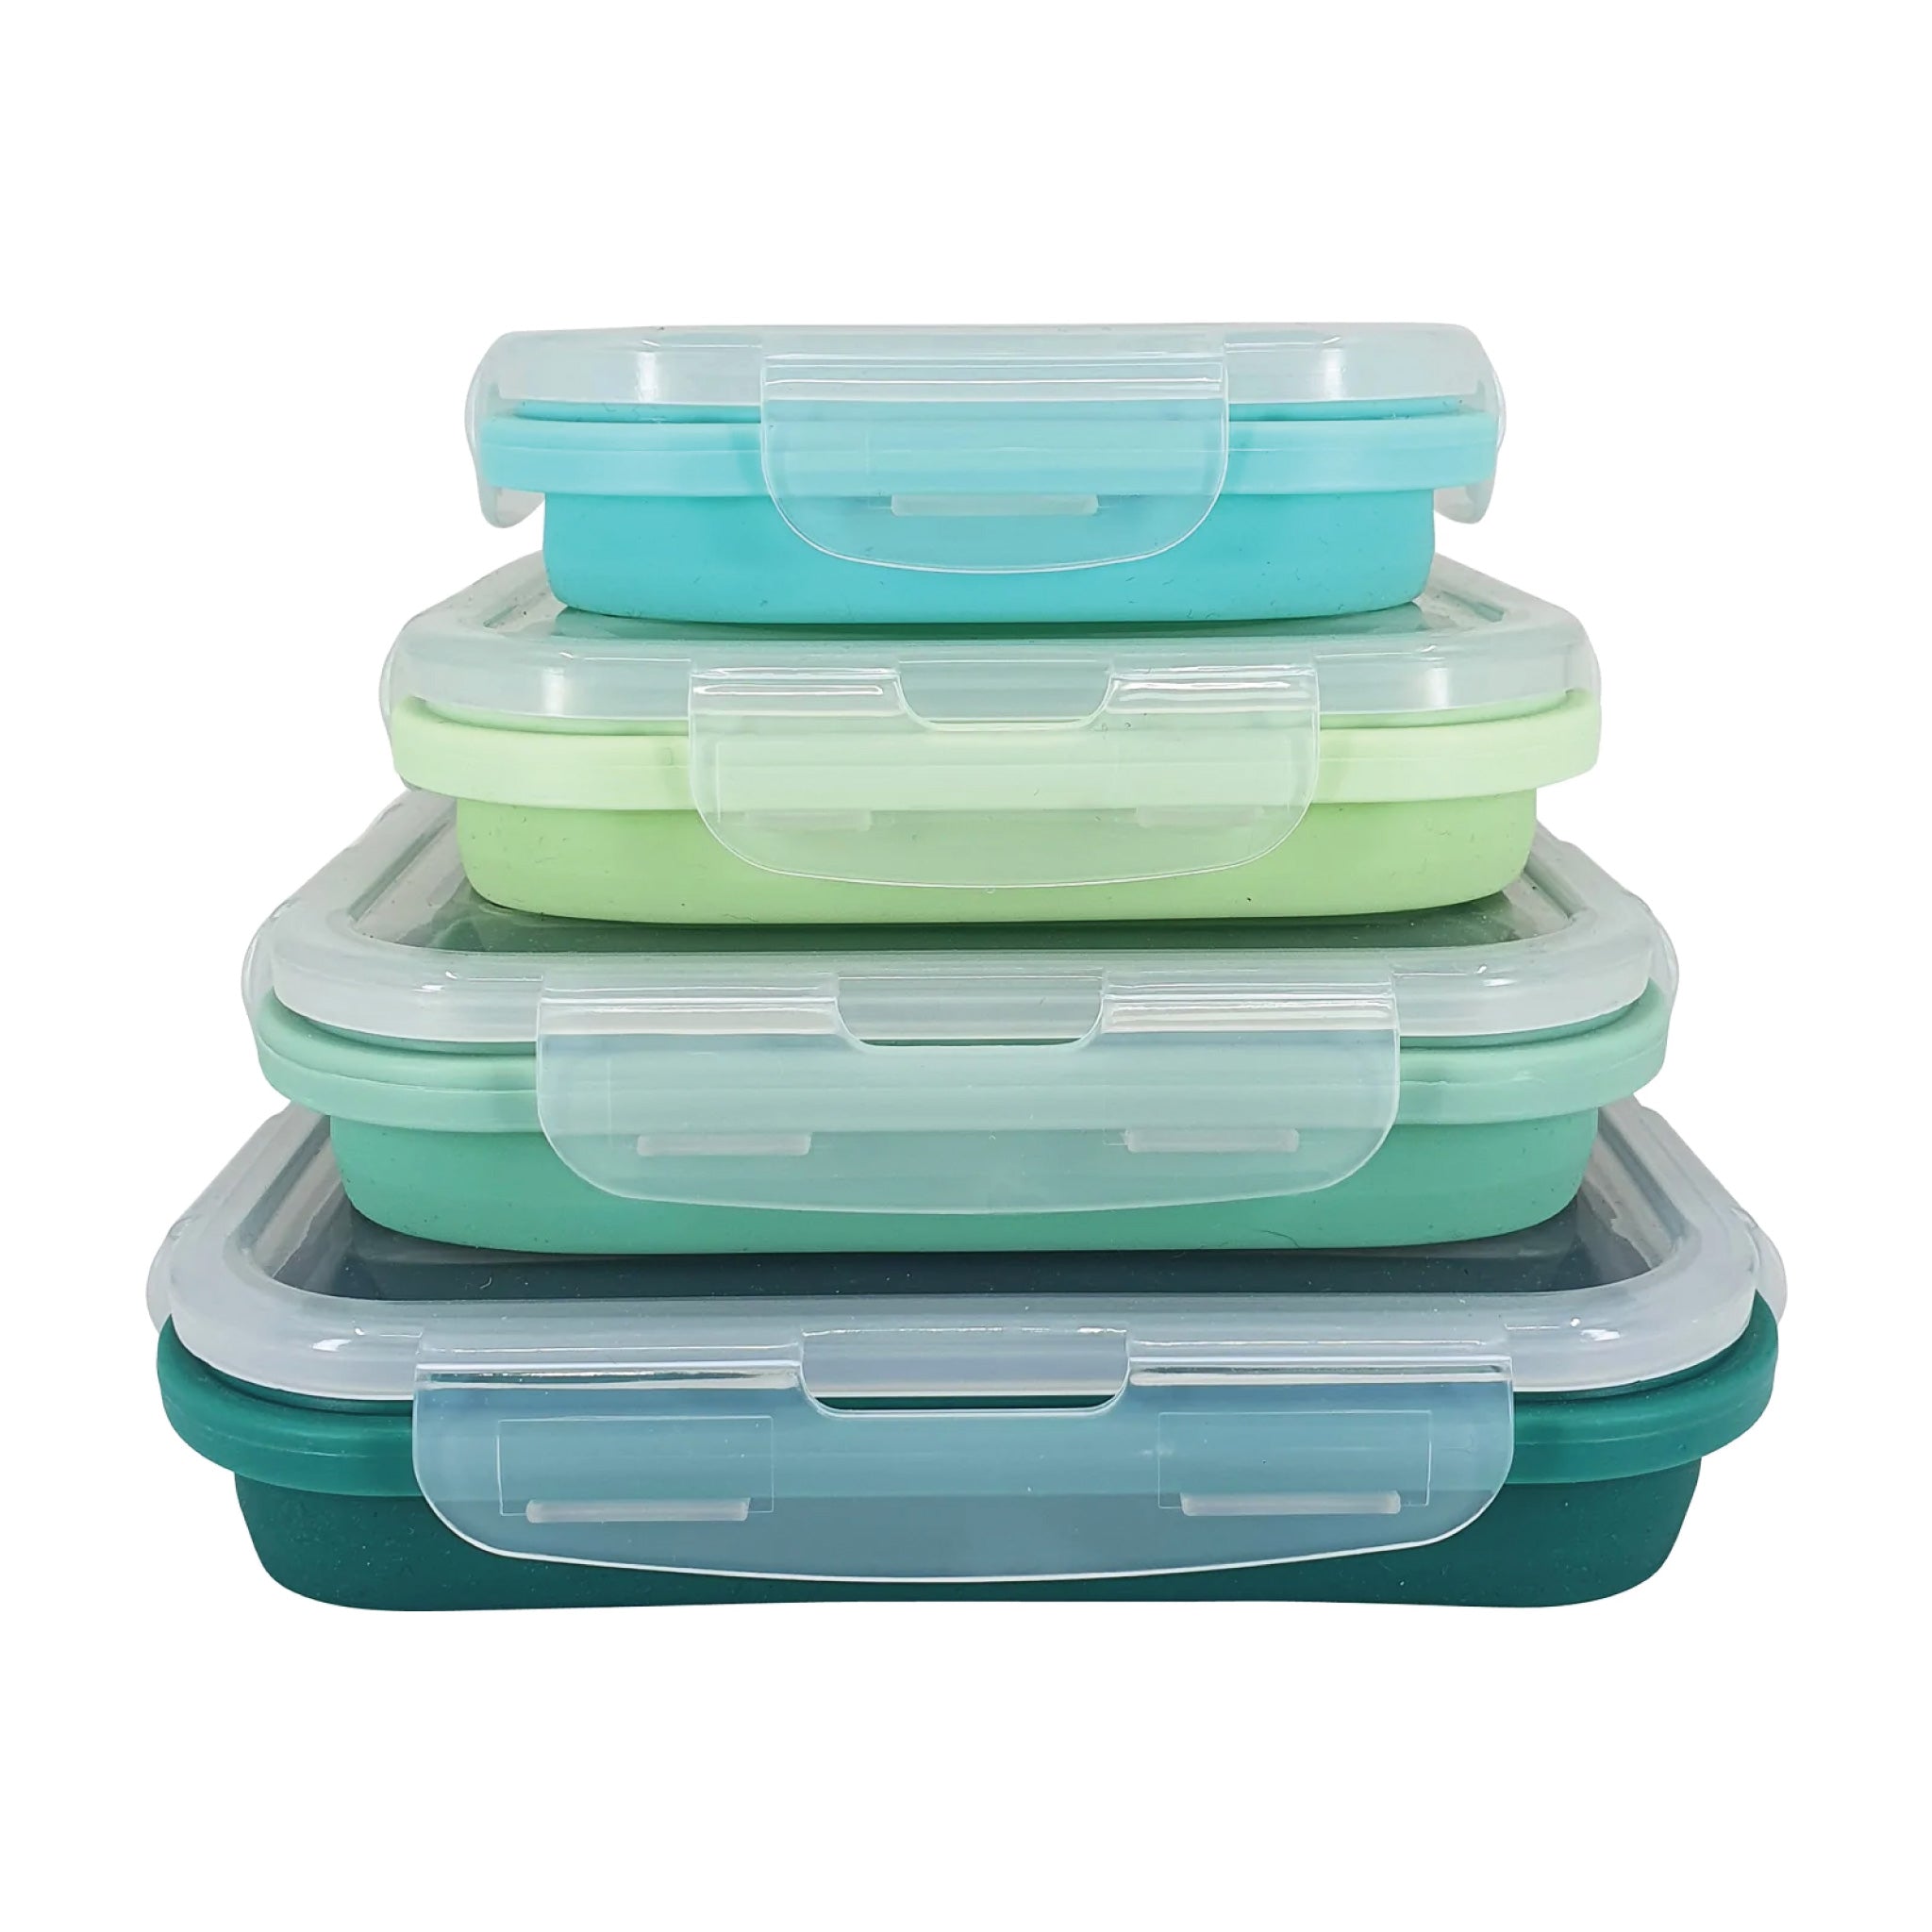  Flat Stacks Collapsible Storage Containers